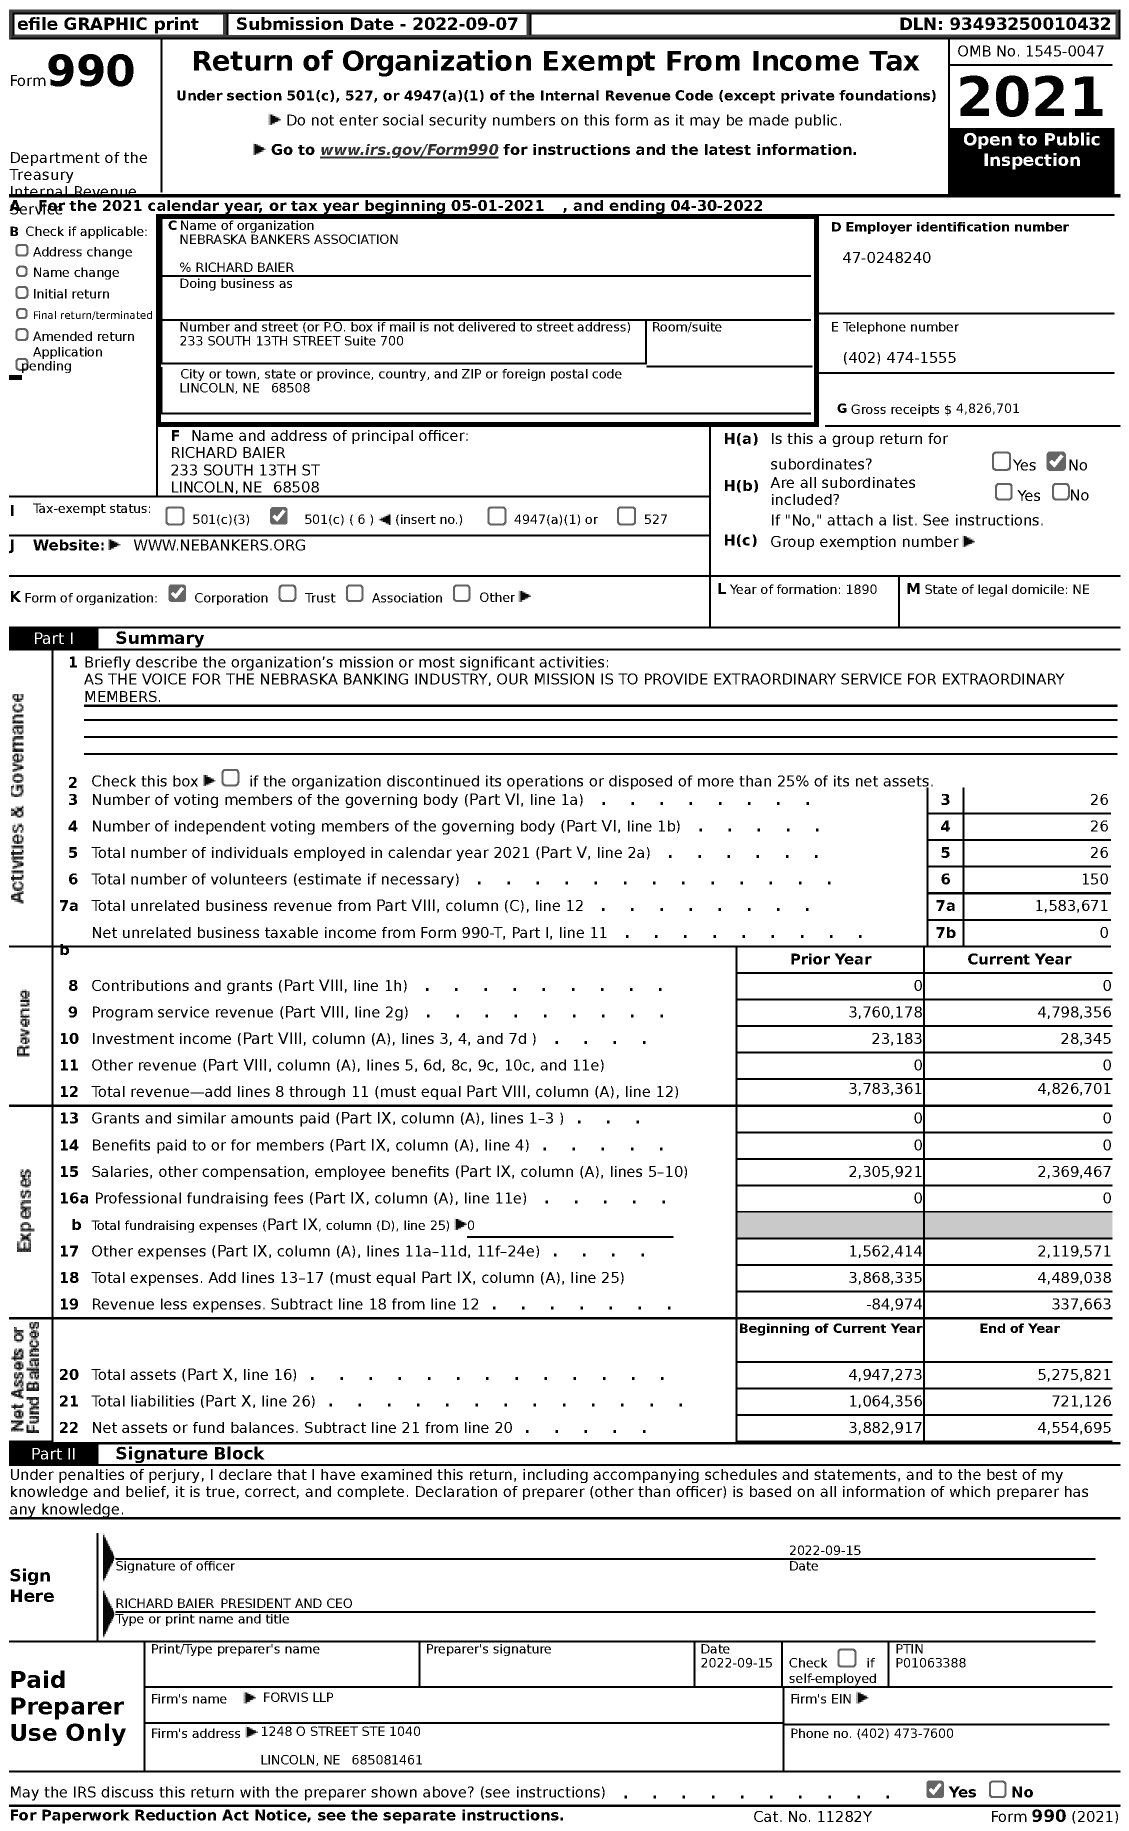 Image of first page of 2021 Form 990 for Nebraska Bankers Association (NBA)